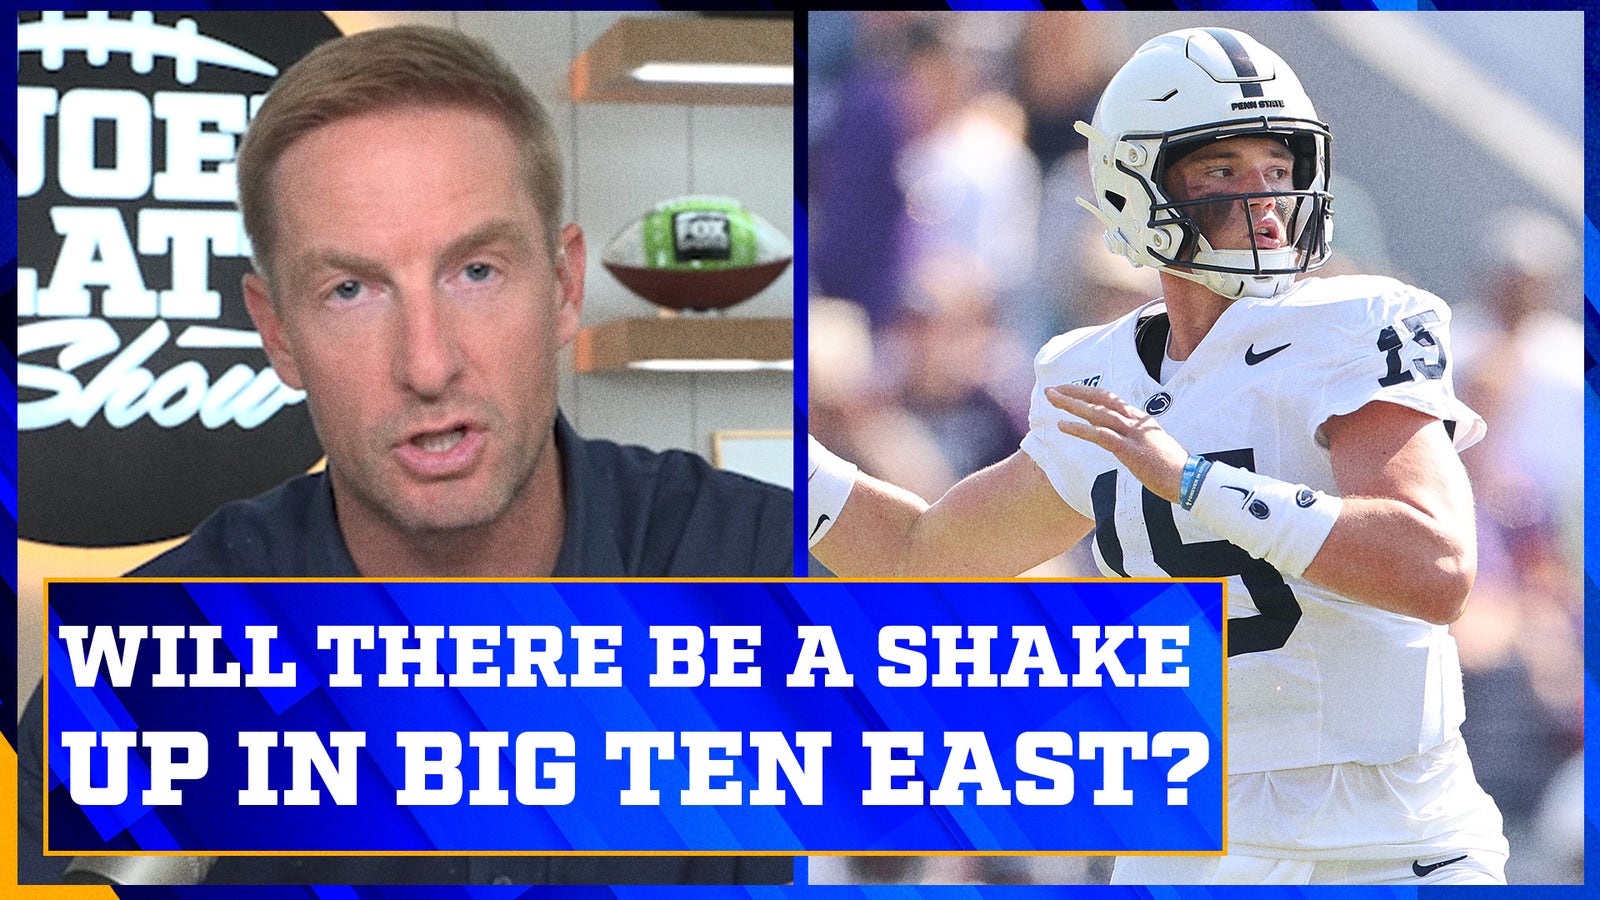 What is the bigger picture for Penn State, Ohio State in the Big Ten?